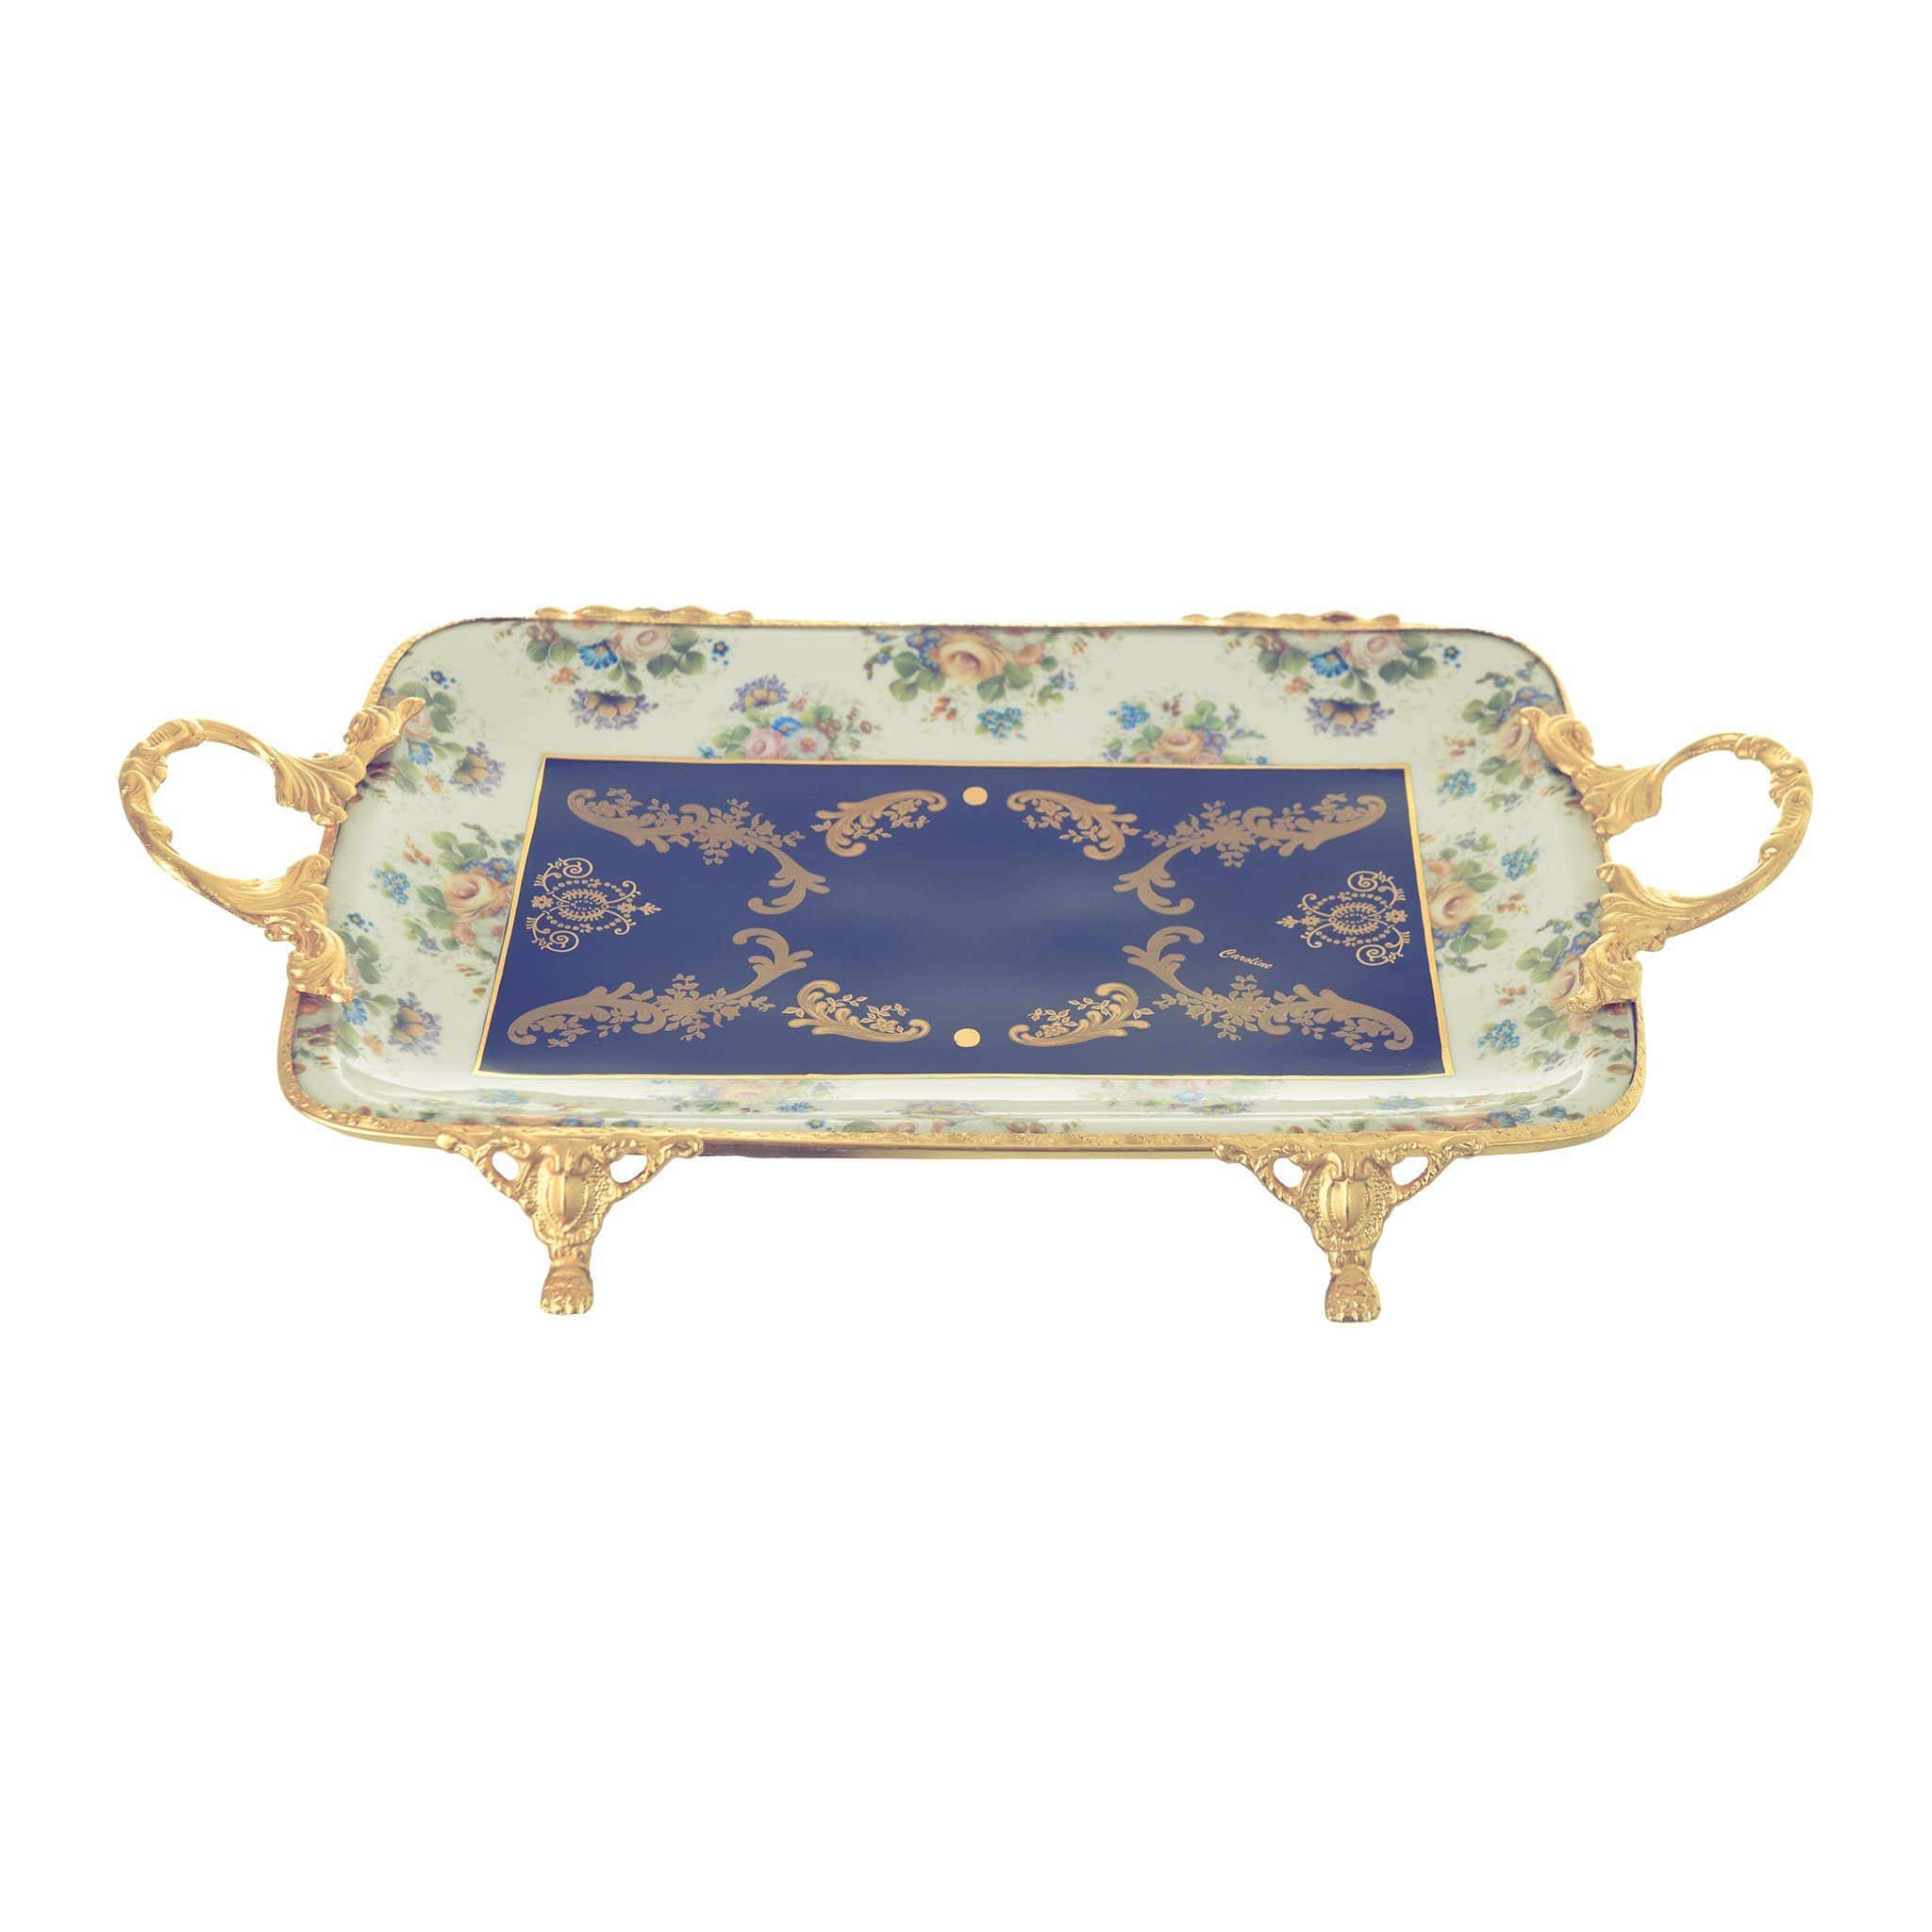 Caroline - Rectangular Tray with Gold Plated Handles & Legs - Floral Design - Blue & Gold - 46x25cm - 58000558